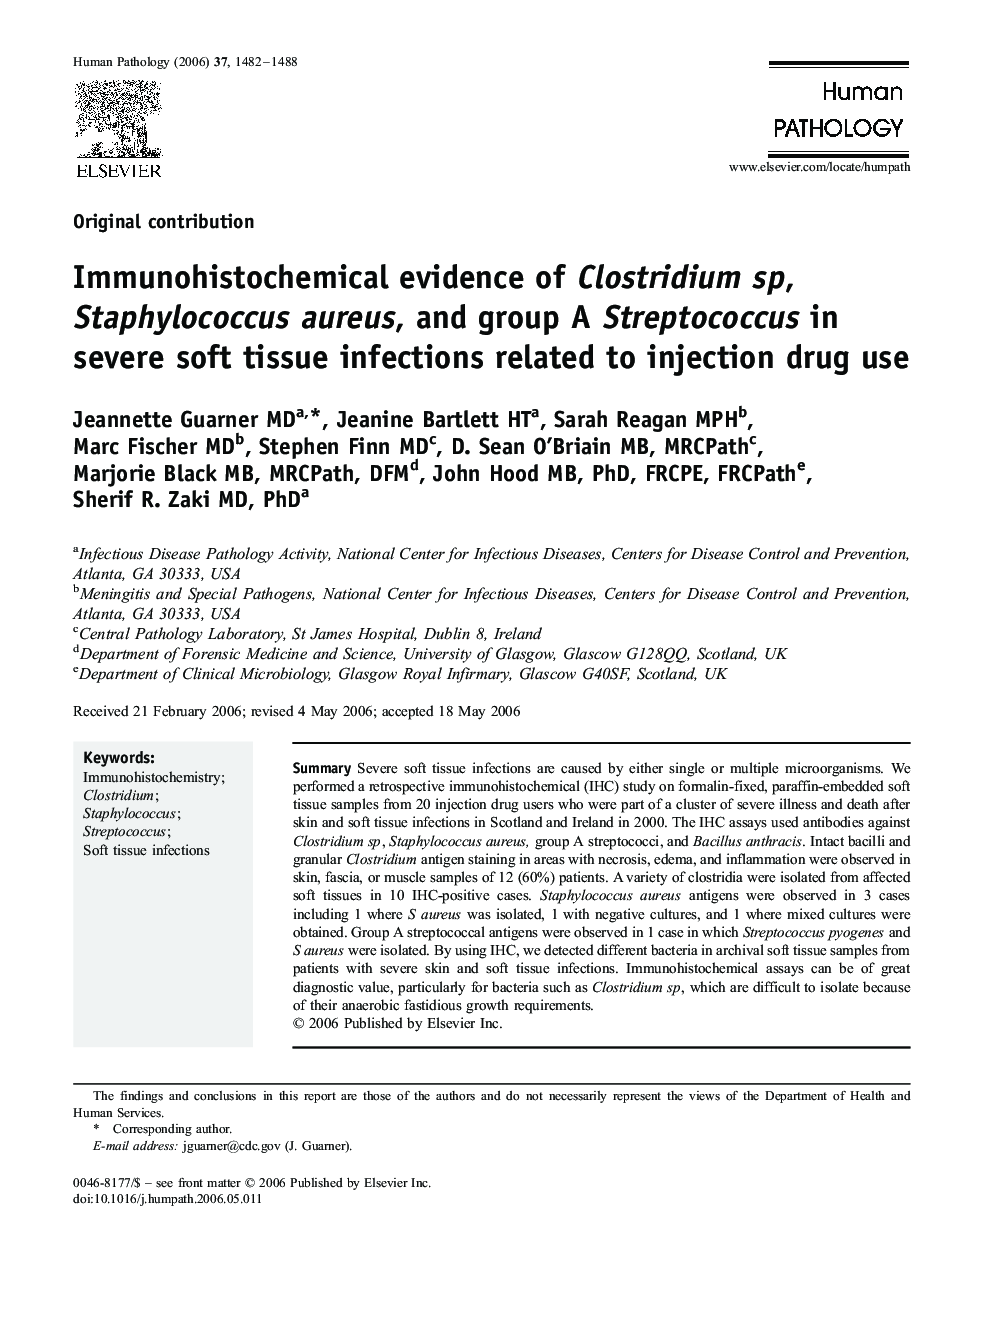 Immunohistochemical evidence of Clostridium sp, Staphylococcus aureus, and group A Streptococcus in severe soft tissue infections related to injection drug use 